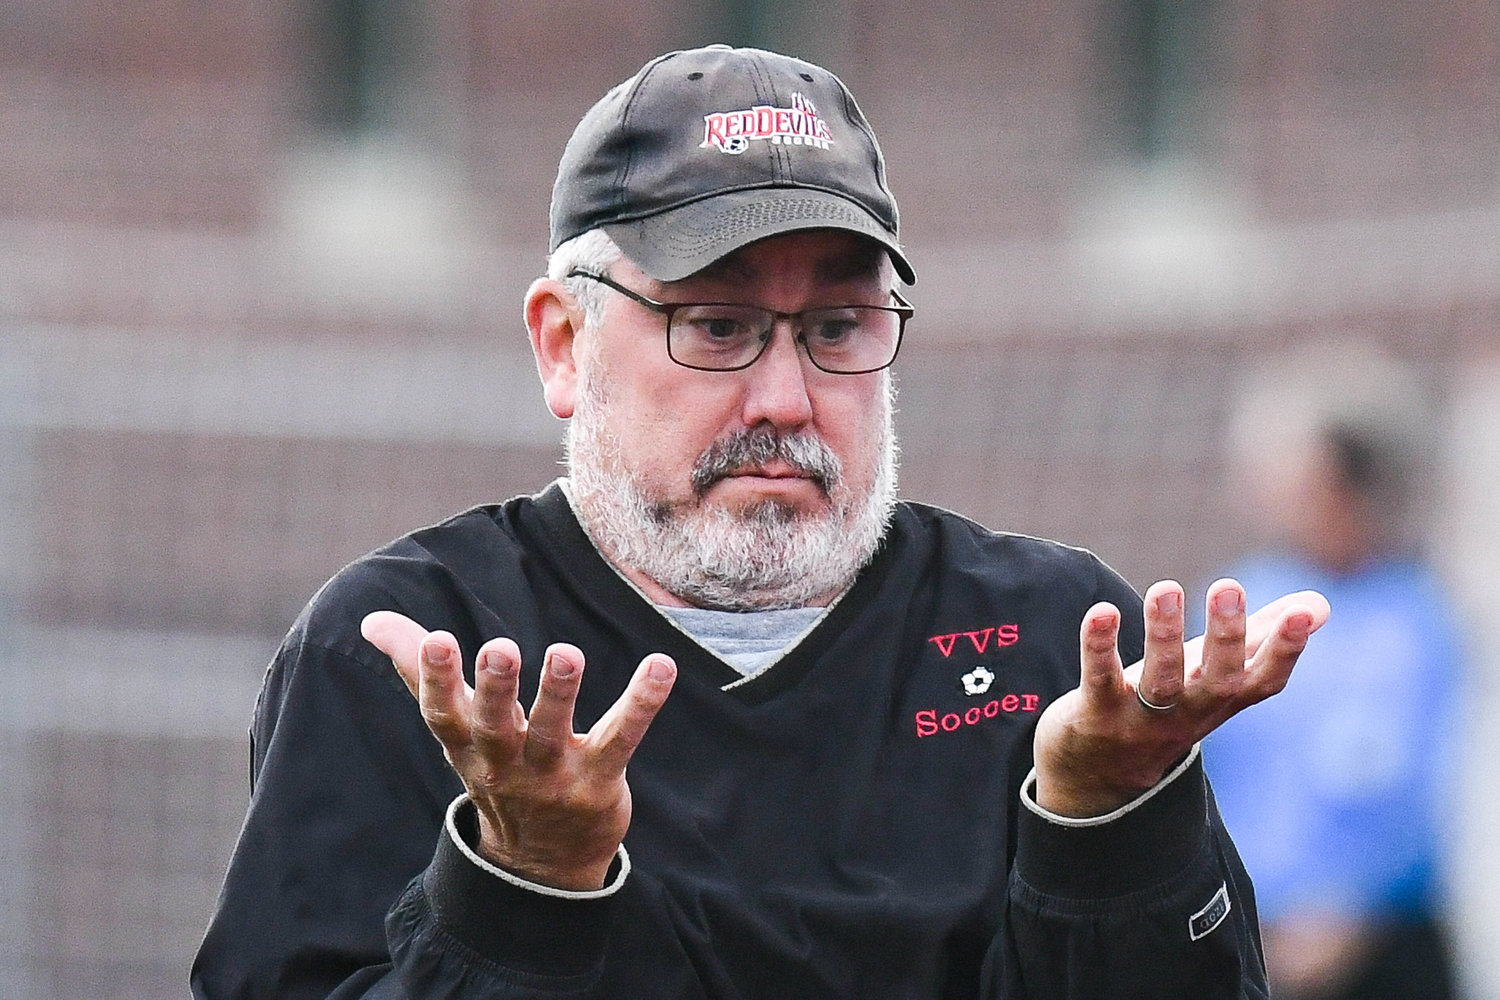 VVS head coach Frank Mitchell reacts on the sidelines during the soccer game against Proctor on Tuesday.